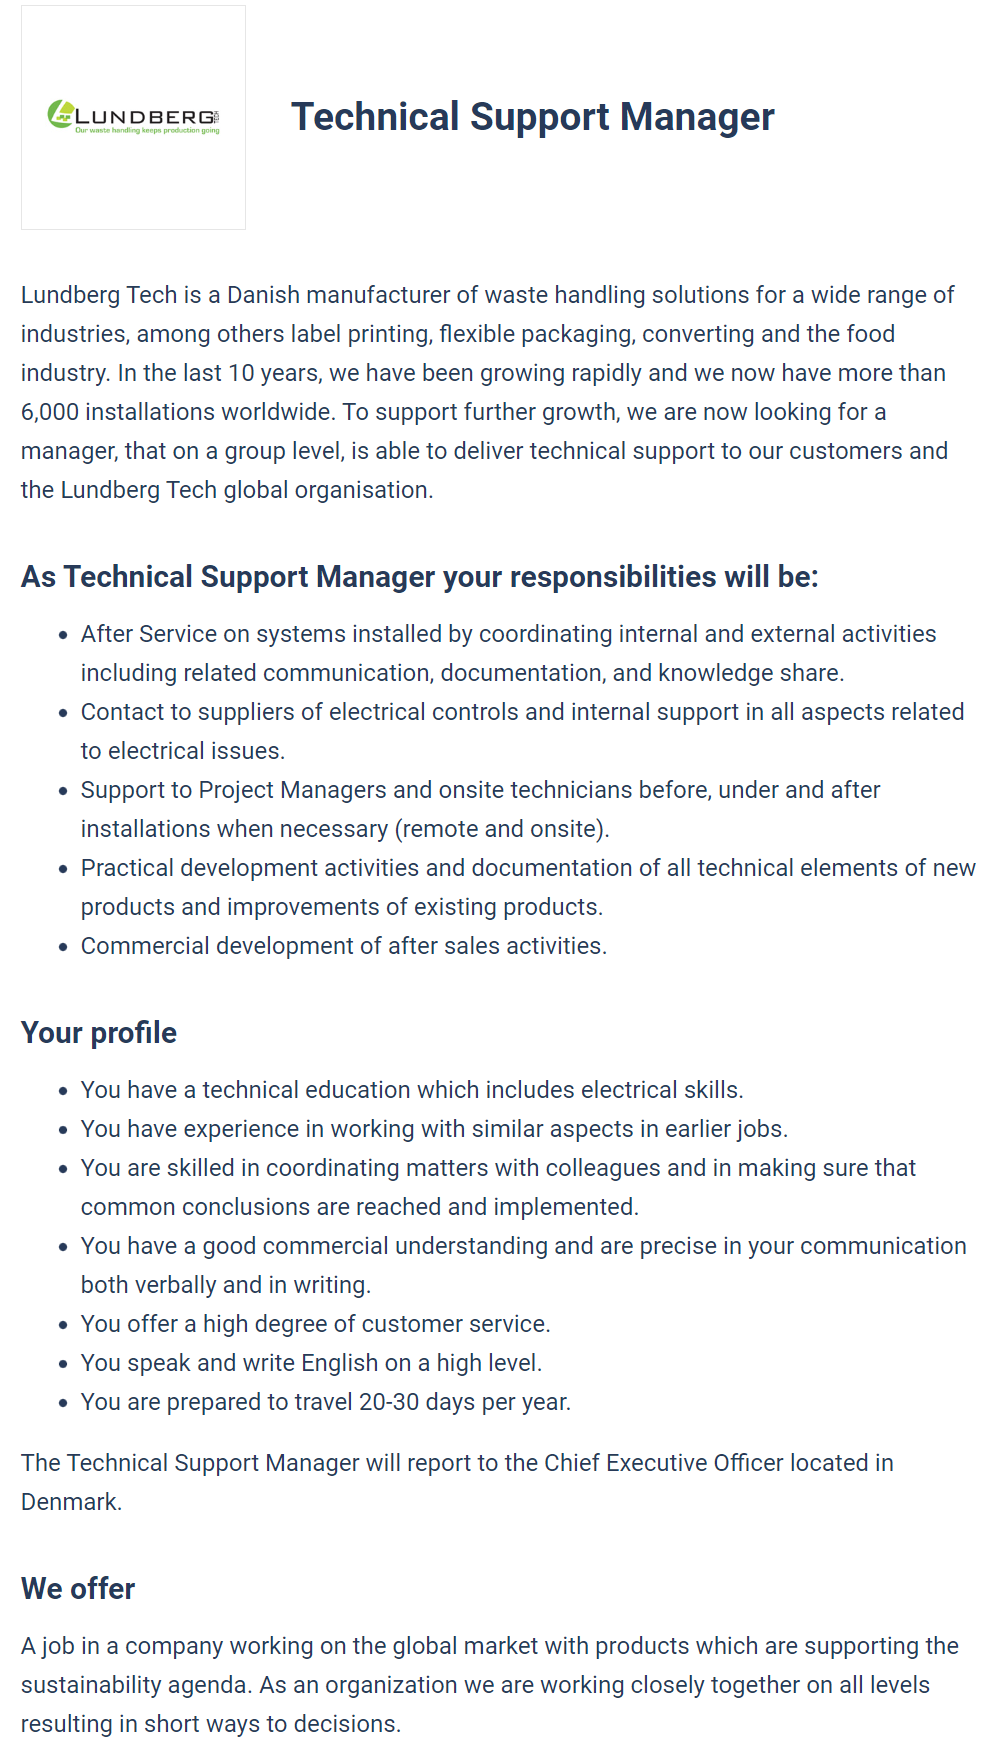 Join the Lundberg Tech team, we are hiring a Technical Support Manager!